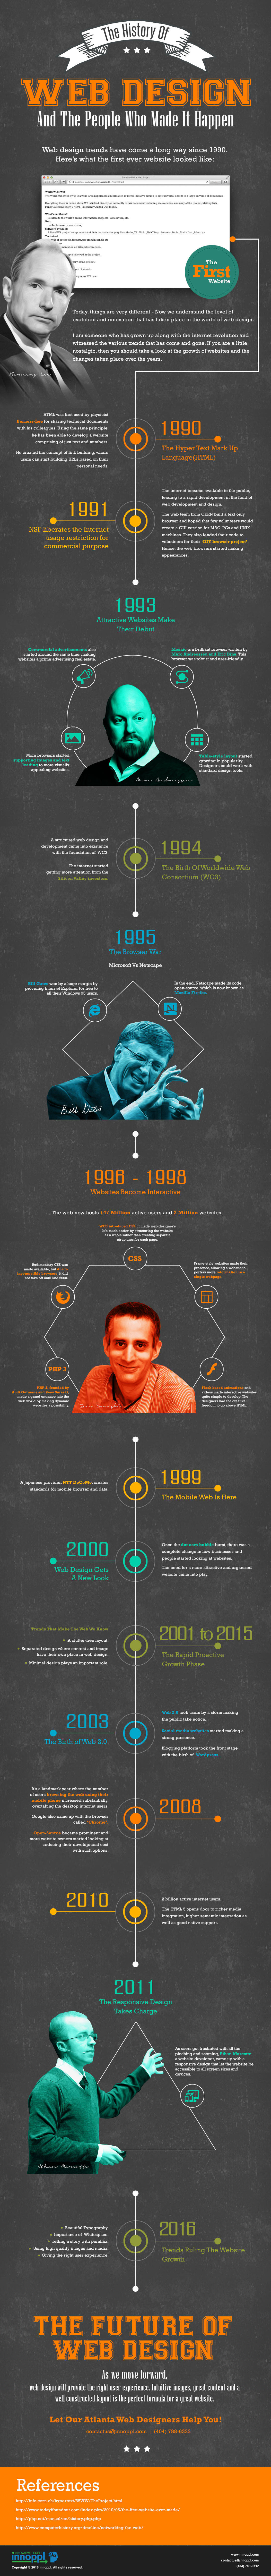 The History Of Web Design